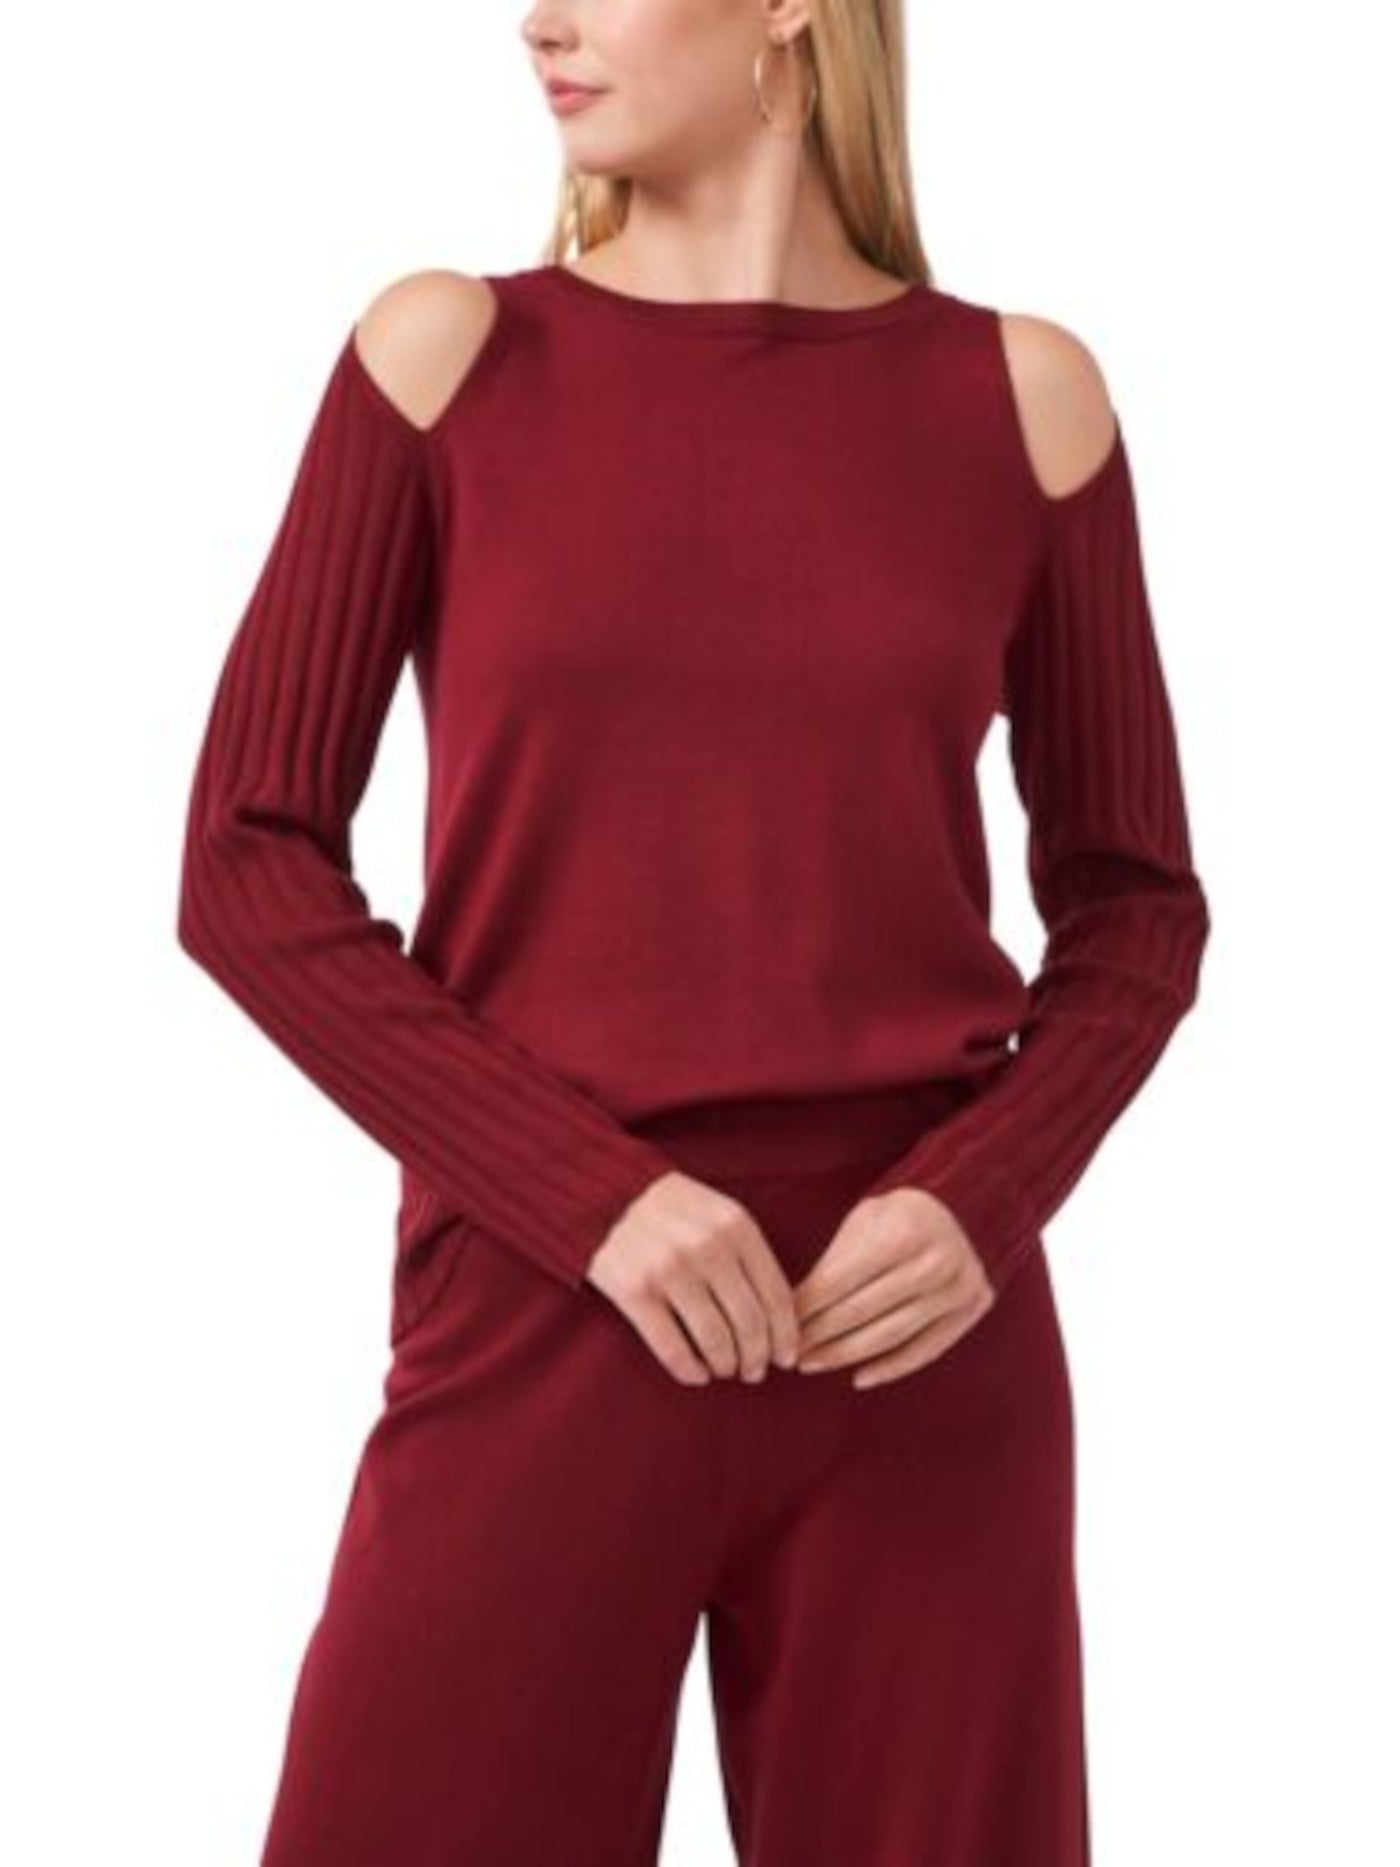 VINCE CAMUTO Womens Maroon Stretch Ribbed Cold Shoulder Mixed Textured Long Sleeve Crew Neck Top XL